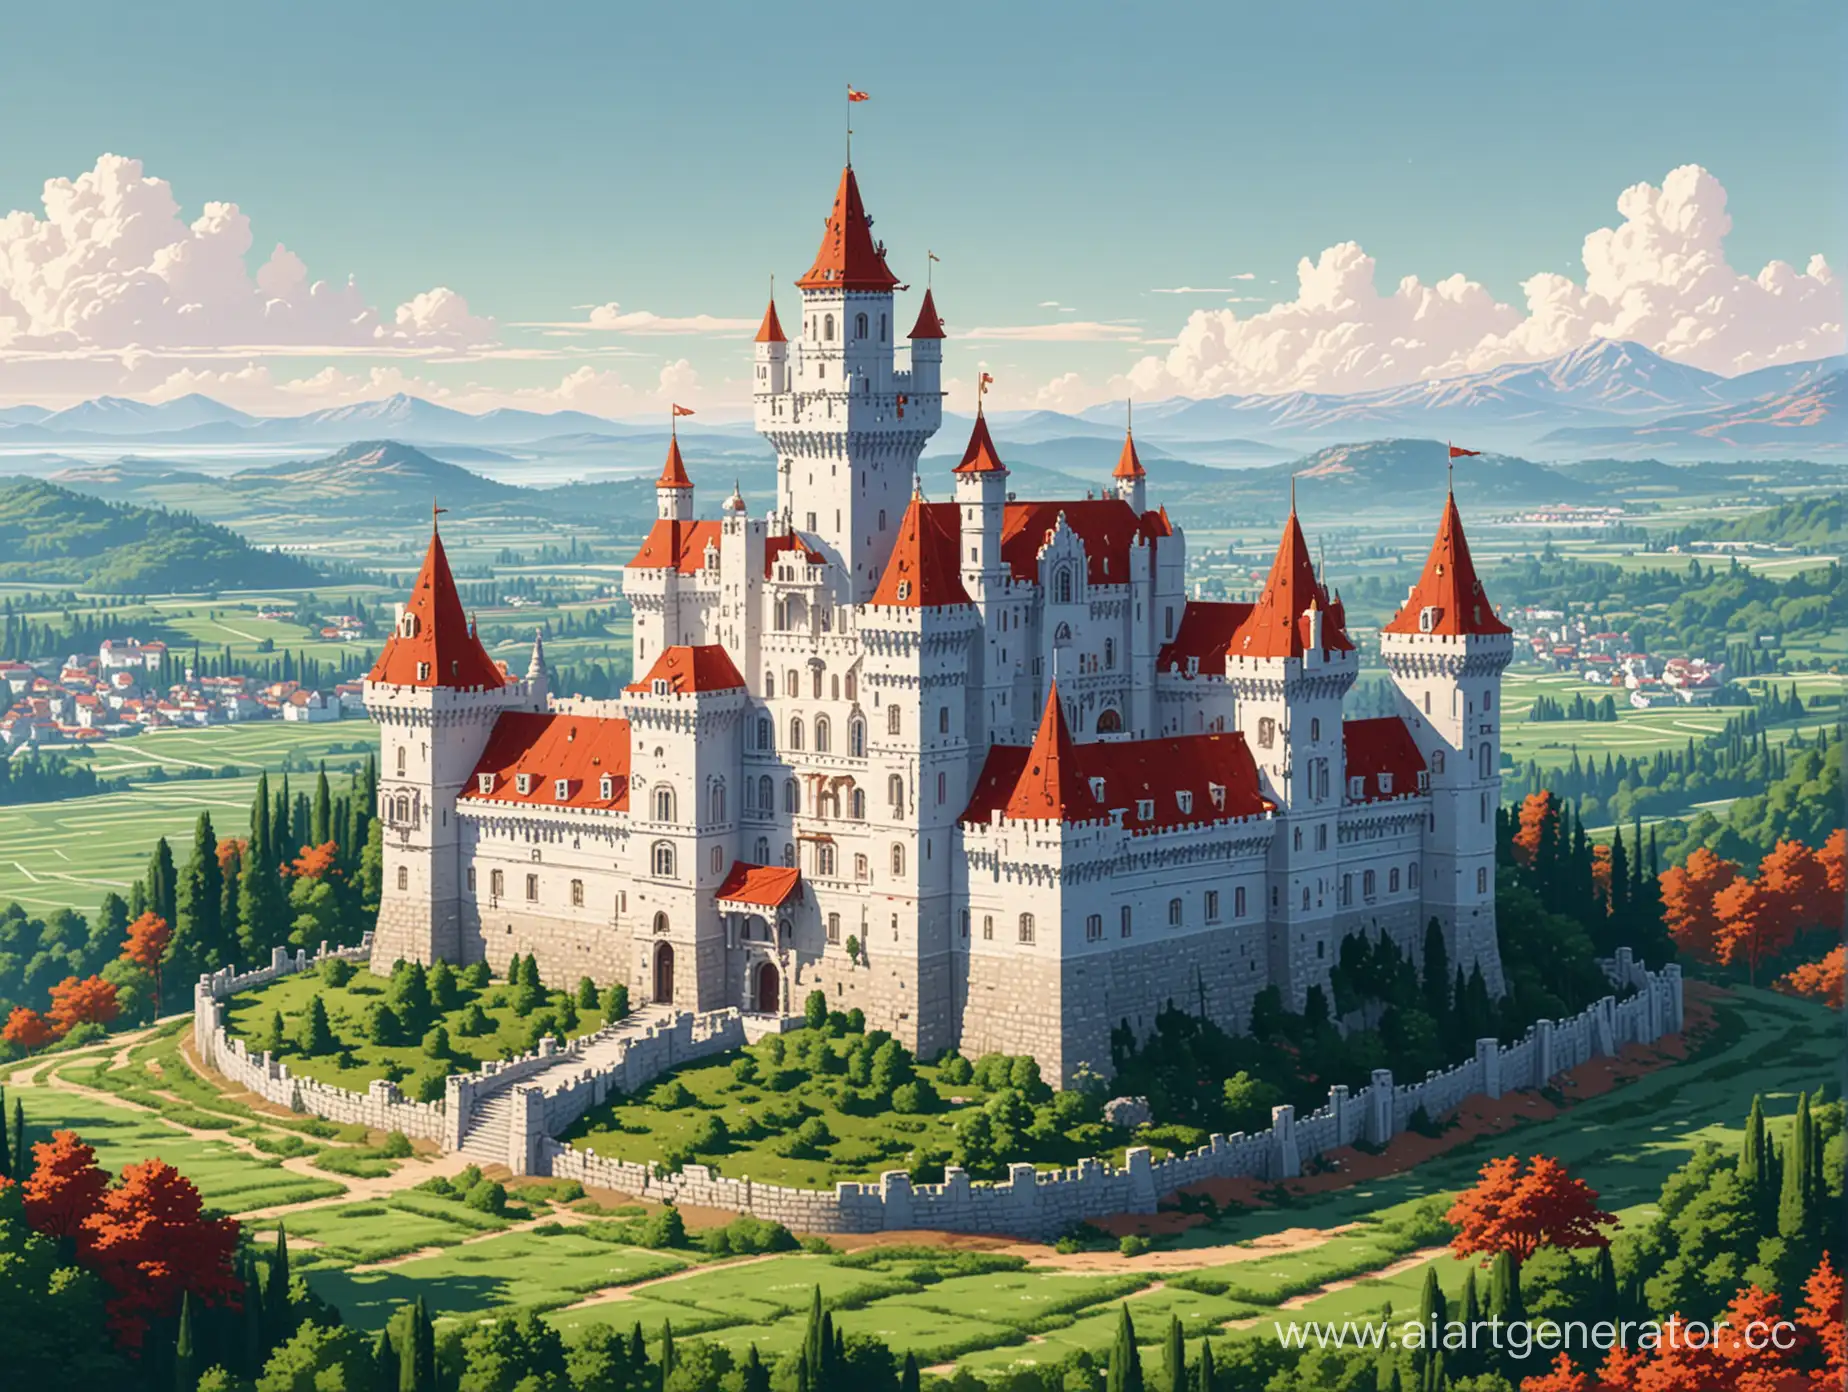 Luxurious-White-Castle-with-Red-Roofs-Amidst-Lush-Green-Fields-and-a-Bustling-City